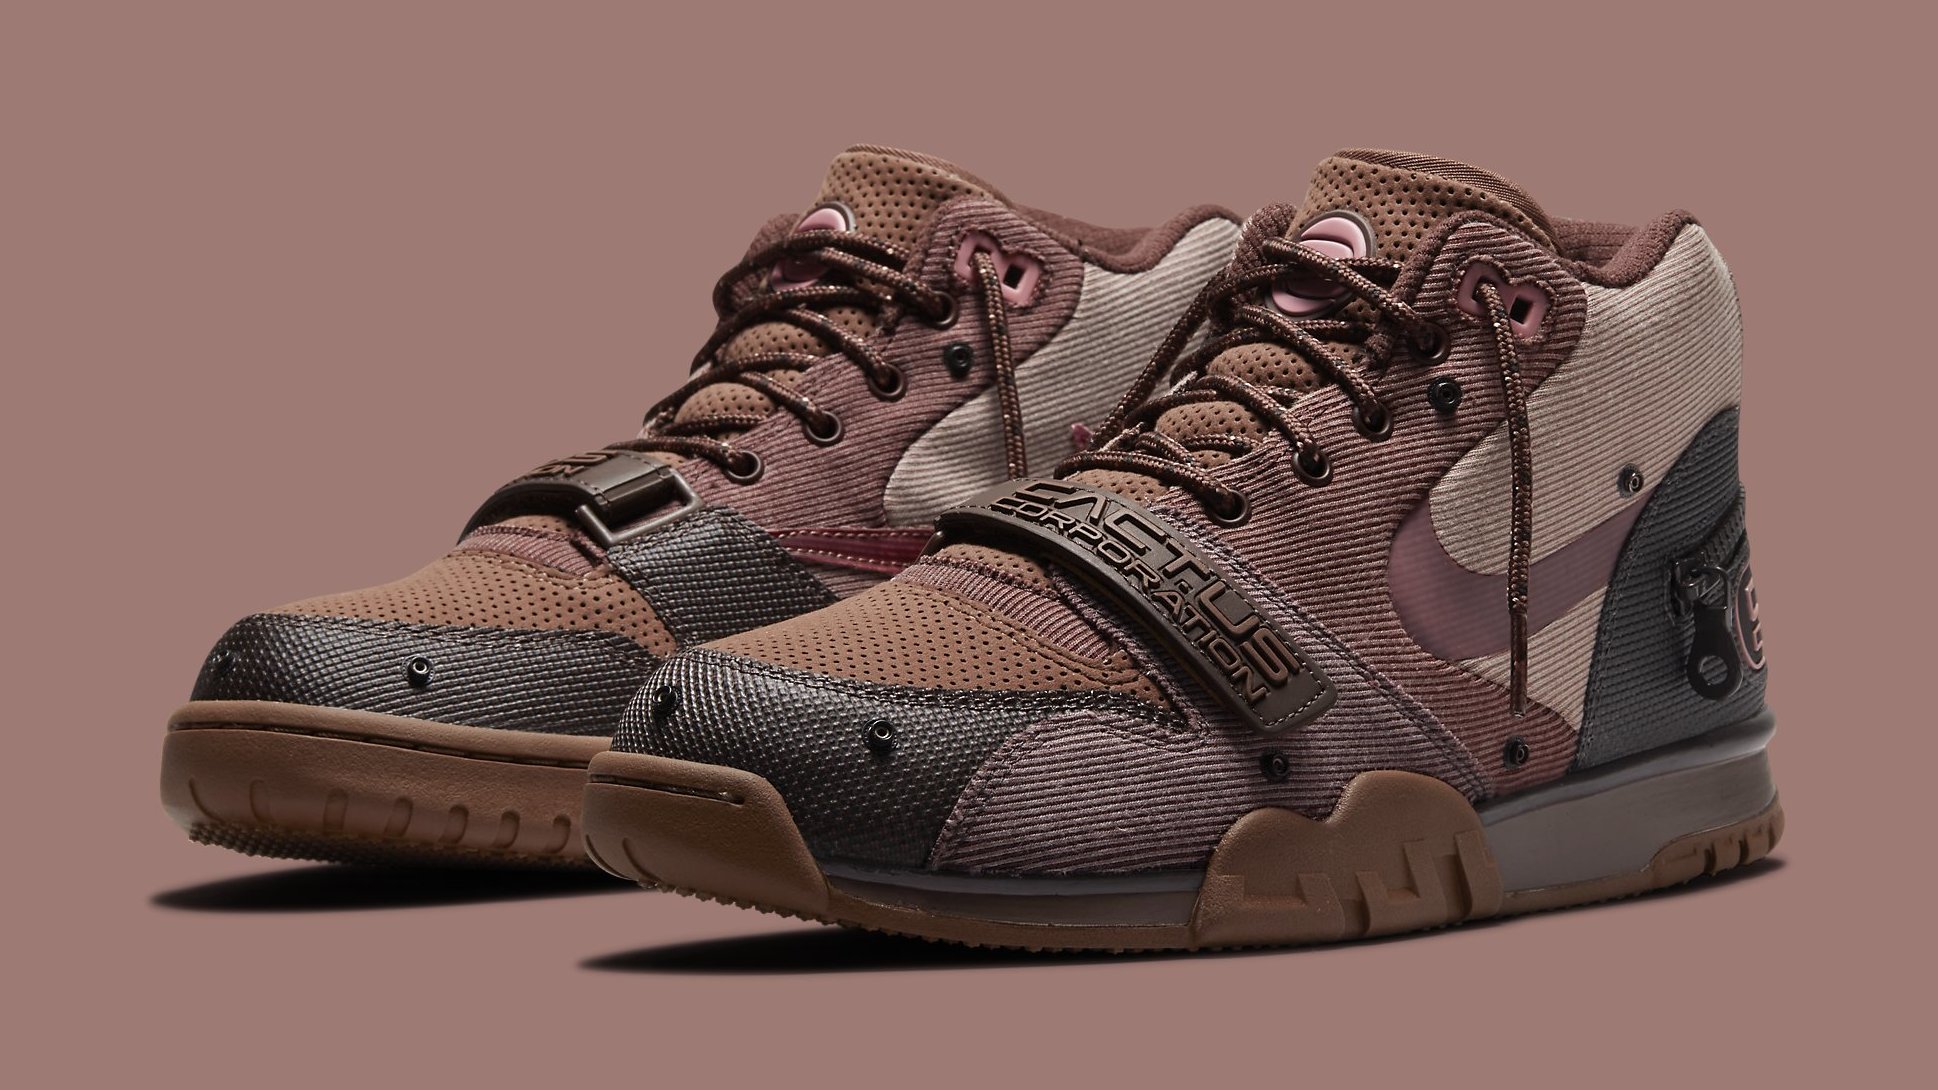 Over 1 Million Entries Reportedly Submitted For Travis Scott x Nike Air Trainer 1 Drop